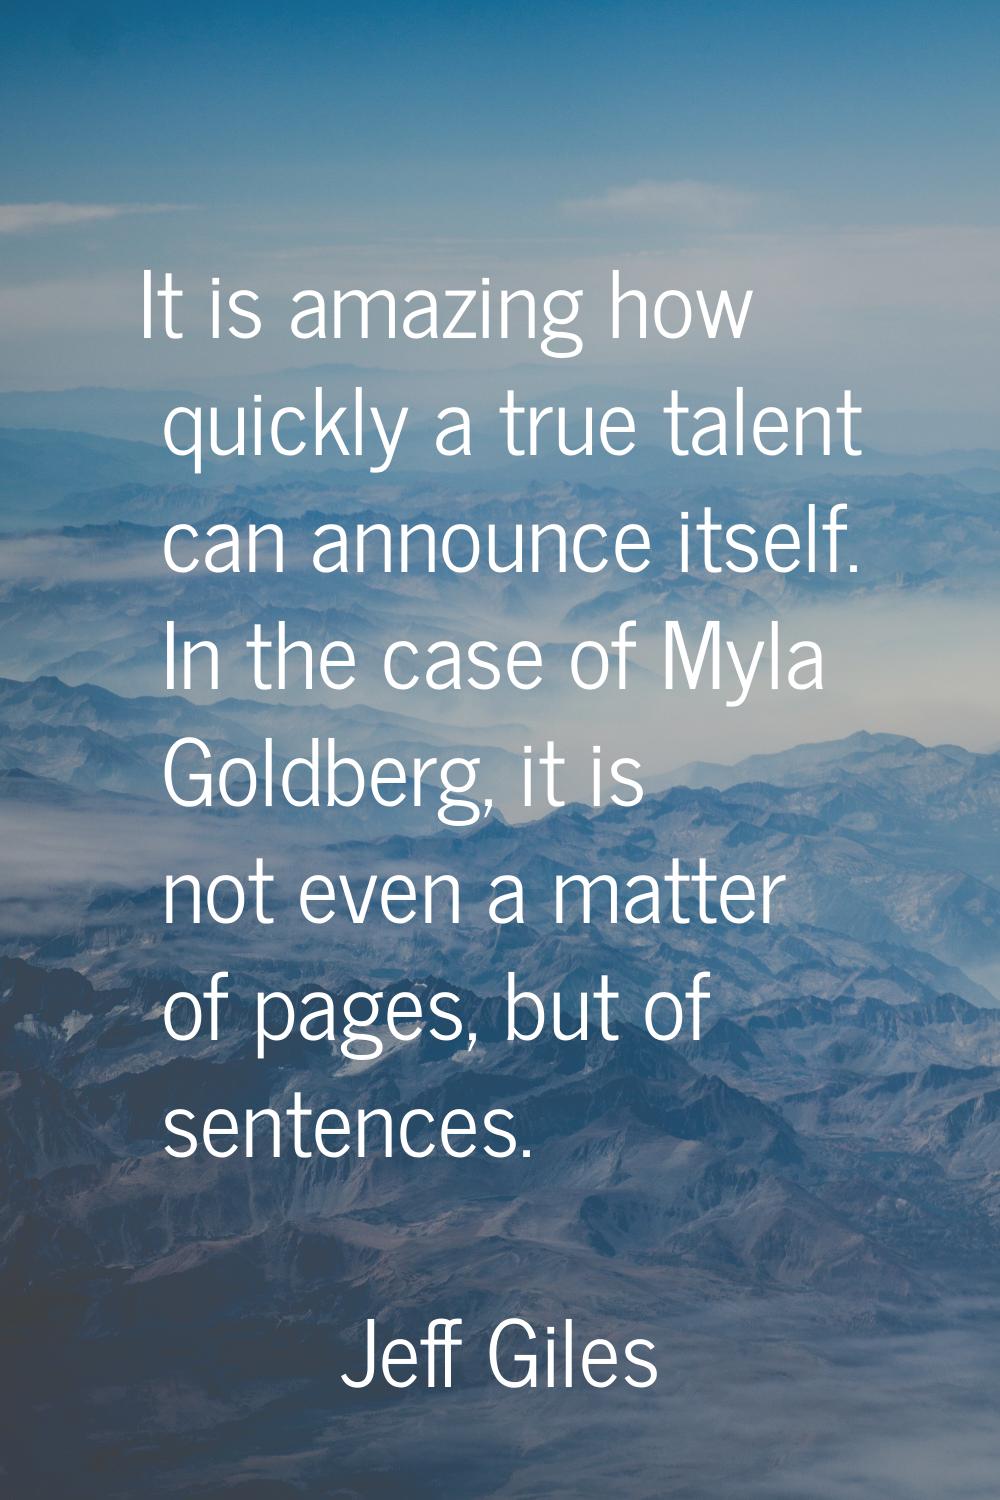 It is amazing how quickly a true talent can announce itself. In the case of Myla Goldberg, it is no